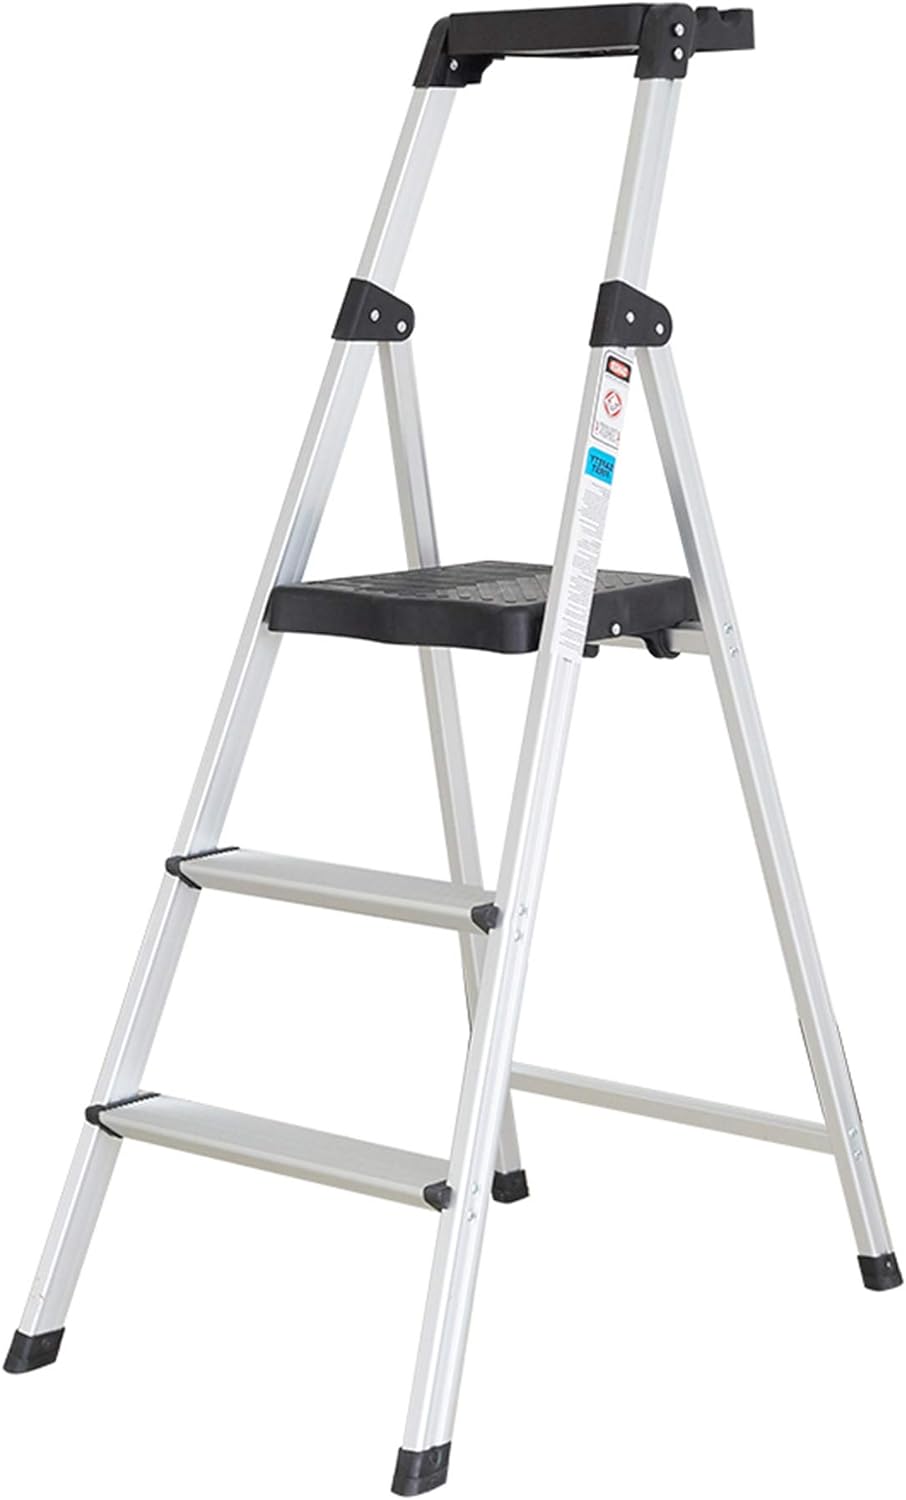 3 Step Ladder with Project Tray Folding Step Stool Lightweight Aluminum Anti-Slip Step Support 330 lbs